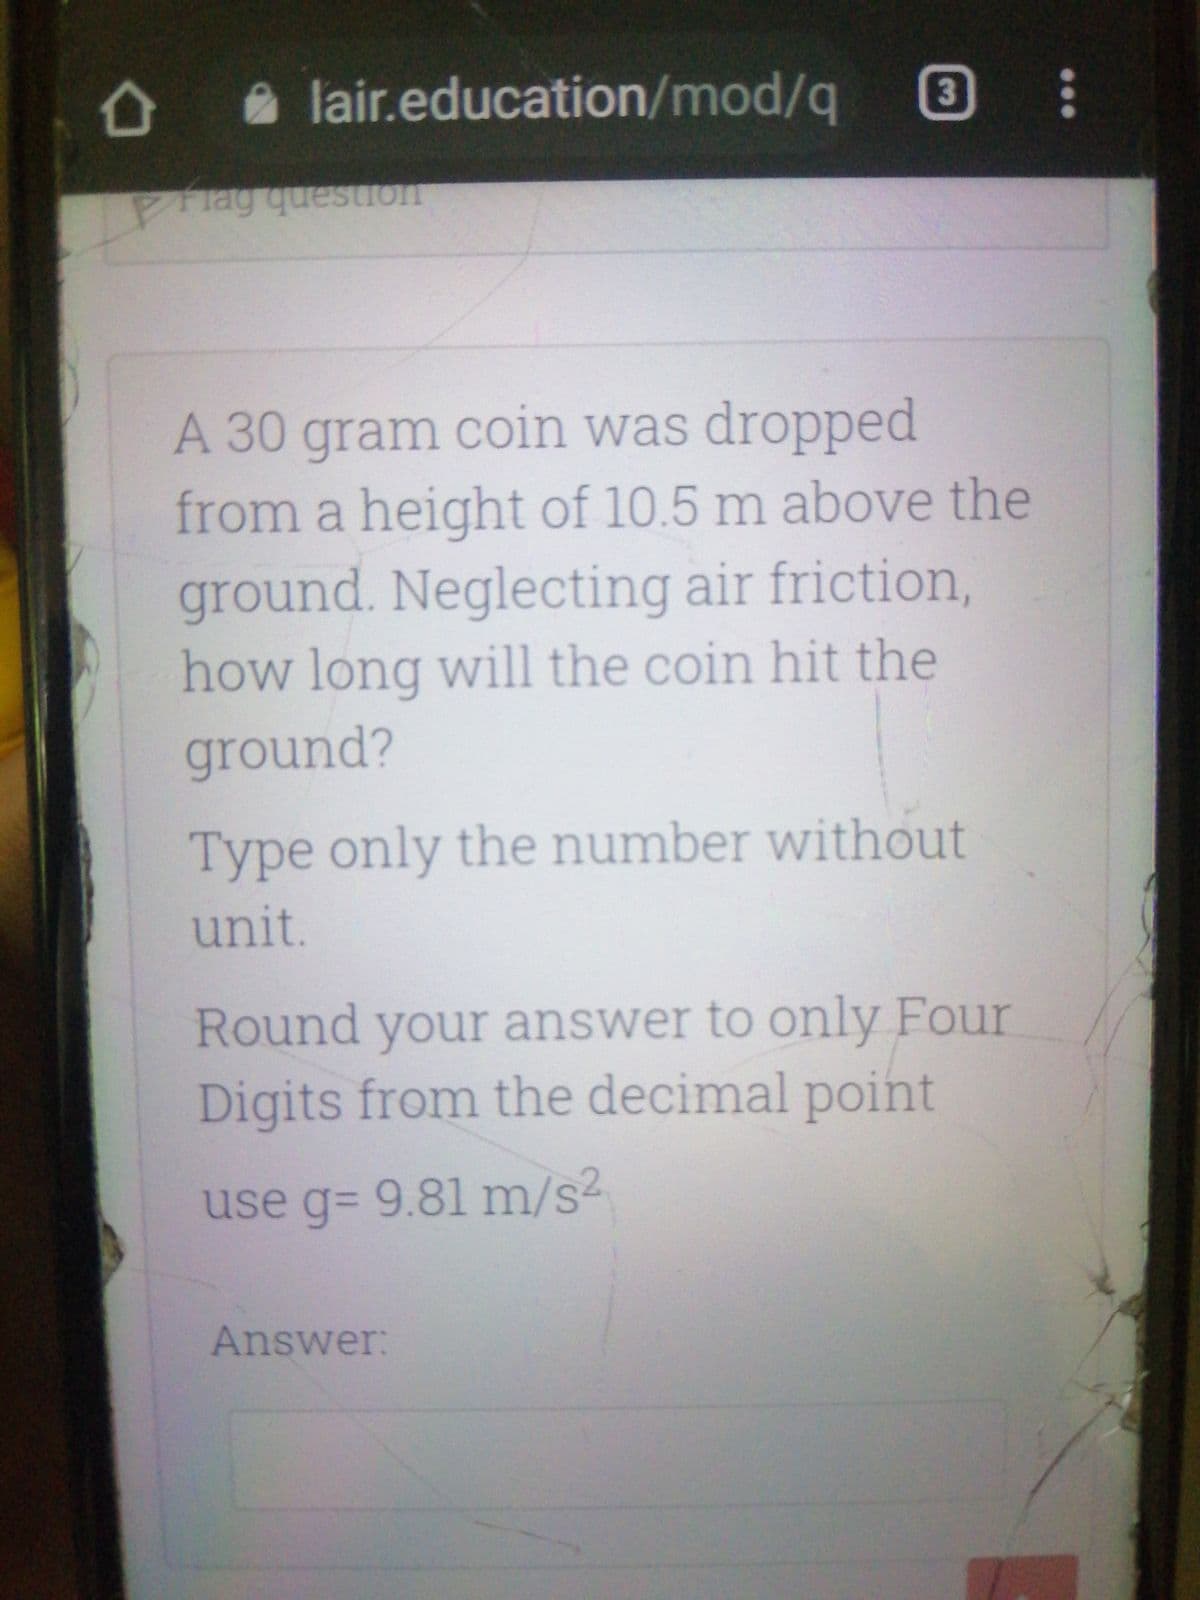 lair.education/mod/q
3
A 30 gram coin was dropped
from a height of 10.5 m above the
ground. Neglecting air friction,
how long will the coin hit the
ground?
Type only the number without
unit.
Round your answer to only Four
Digits from the decimal point
use g= 9.81 m/s2
Answer:
